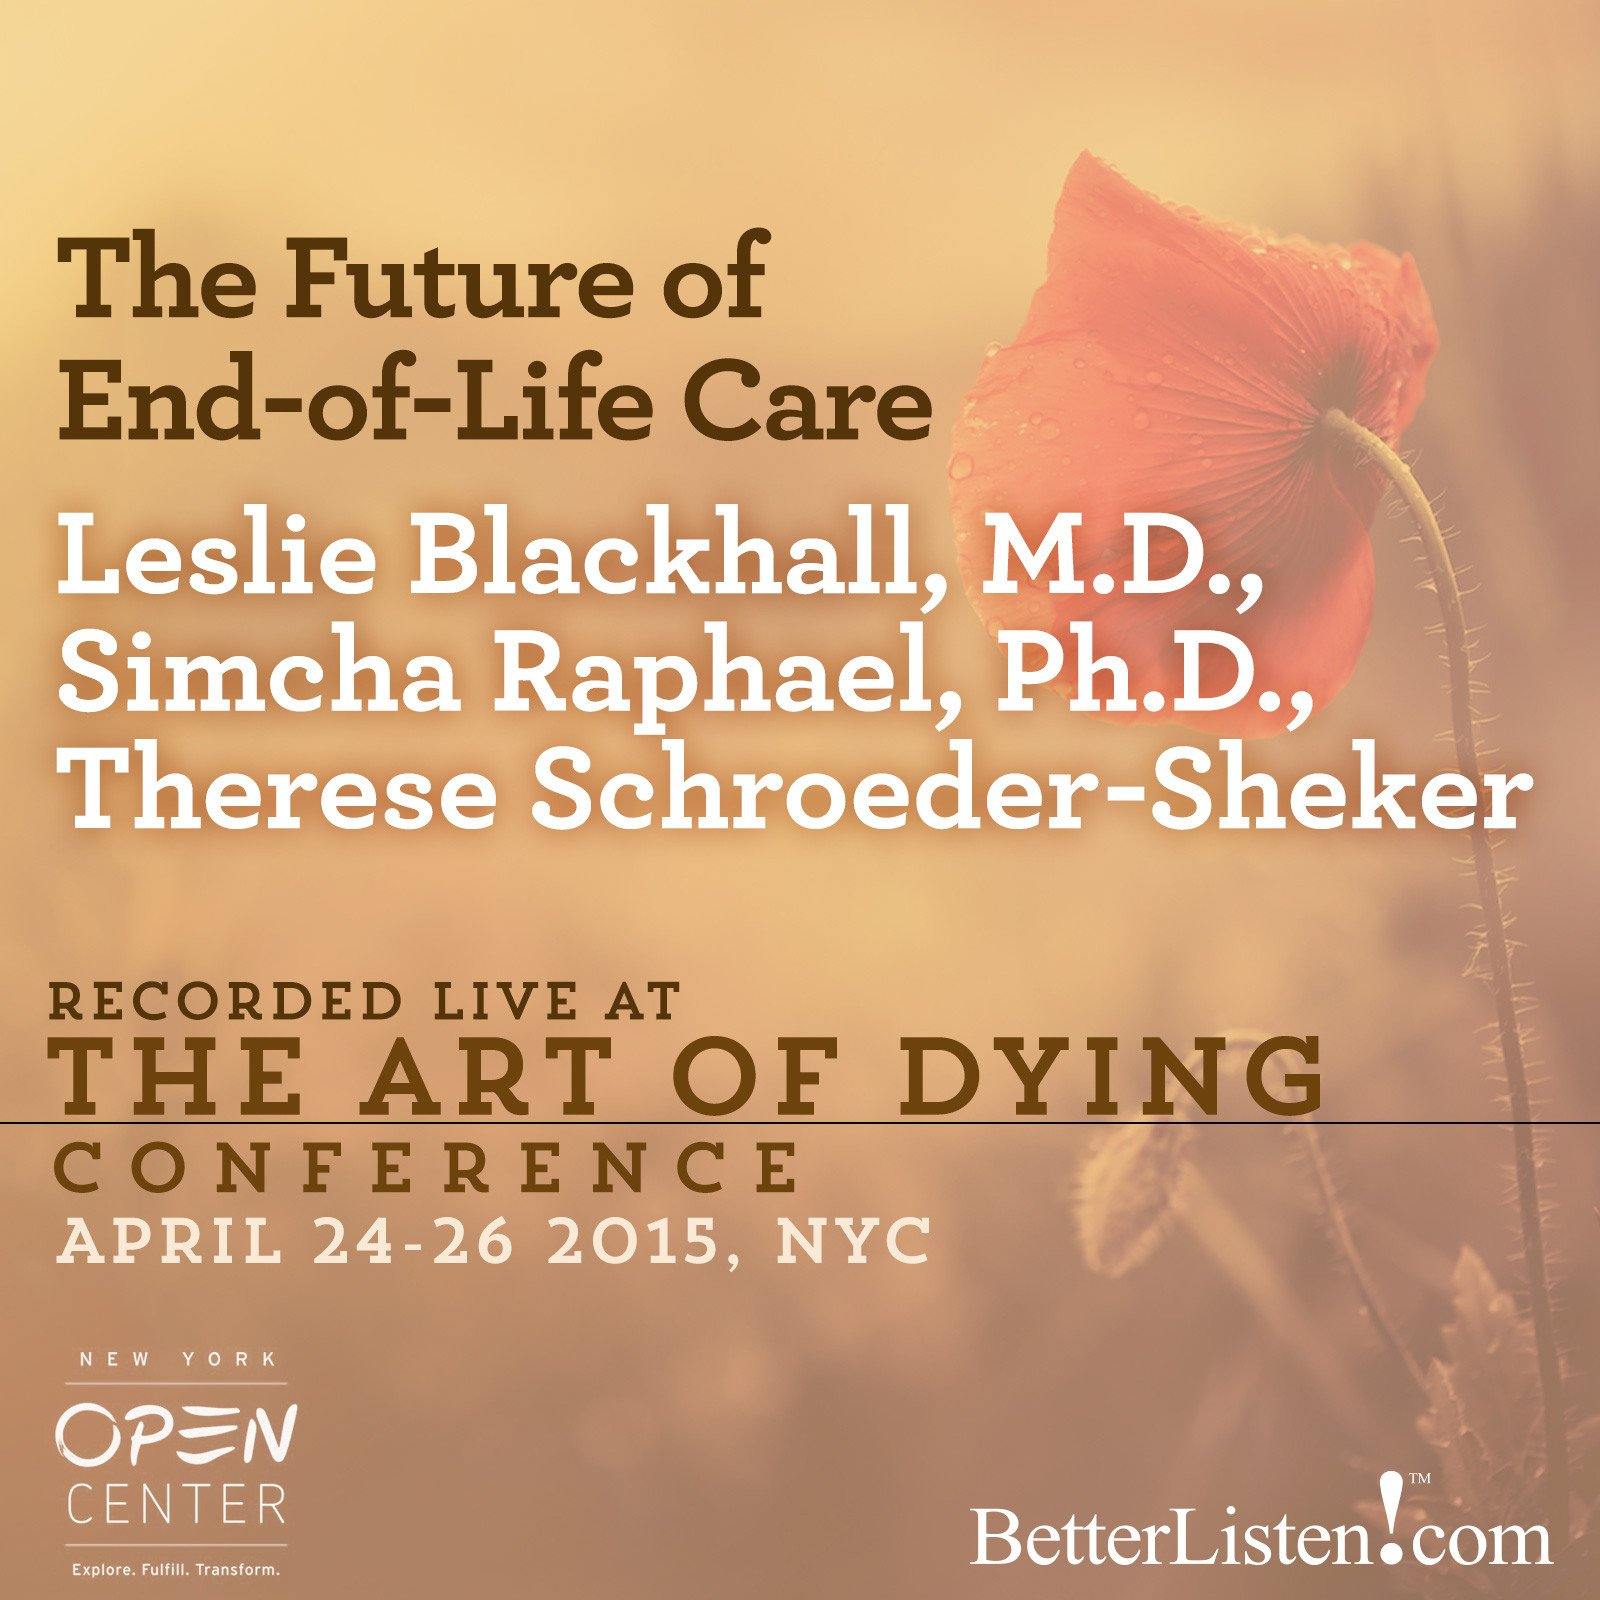 The Future of End-of-Life Care with Leslie Blackhall, M.D., Simcha Raphael, Ph.D, Therese Schroeder-Sheker - BetterListen!